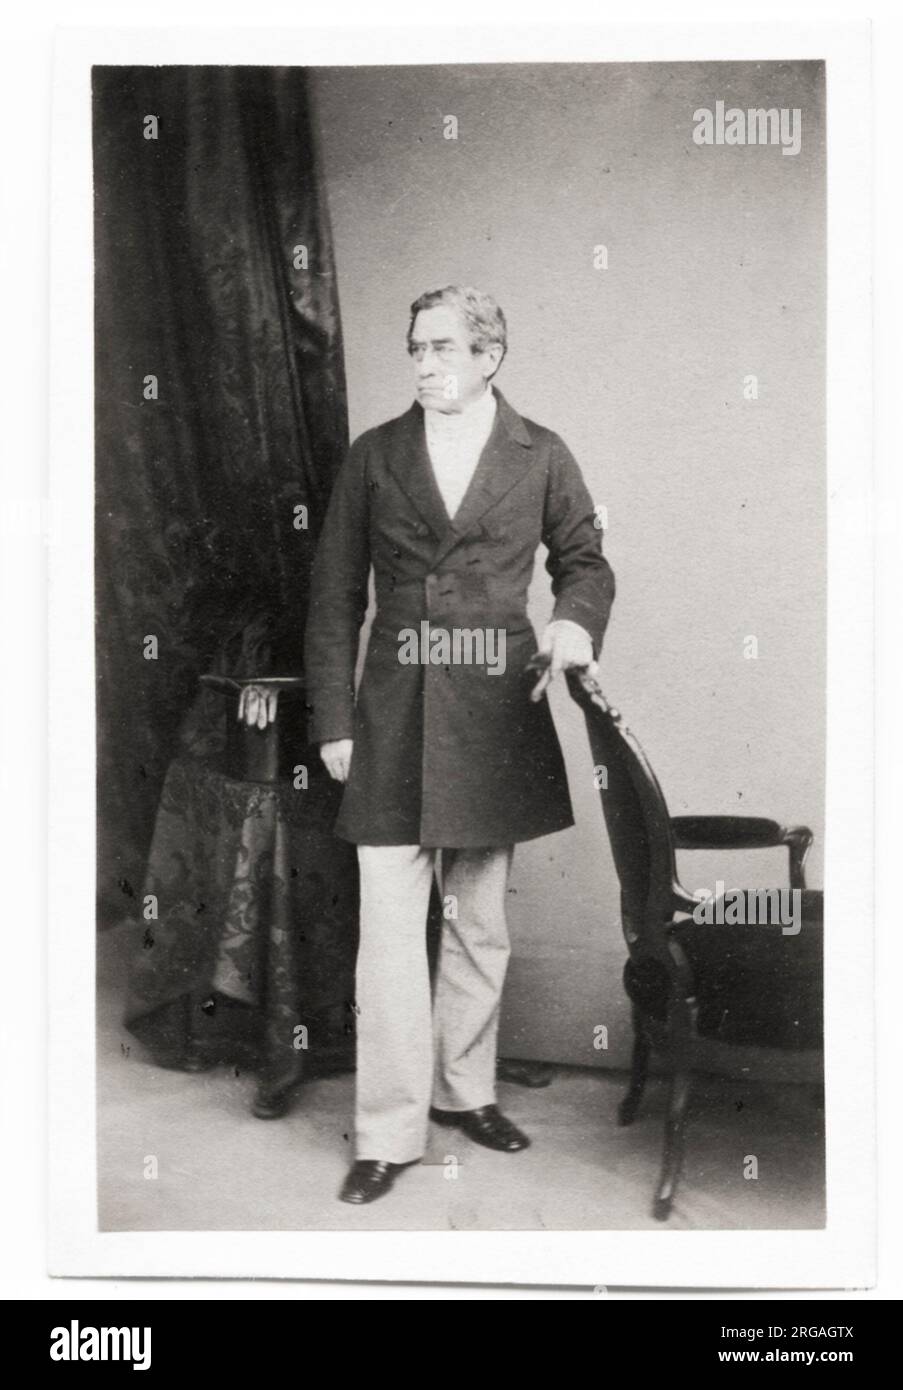 Vintage 19th century photograph: Brownlow Cecil, 2nd Marquess of Exeter KG PC (2 July 1795 - 16 January 1867), styled Lord Burghley until 1804, was a British peer, courtier, and Tory politician. Stock Photo